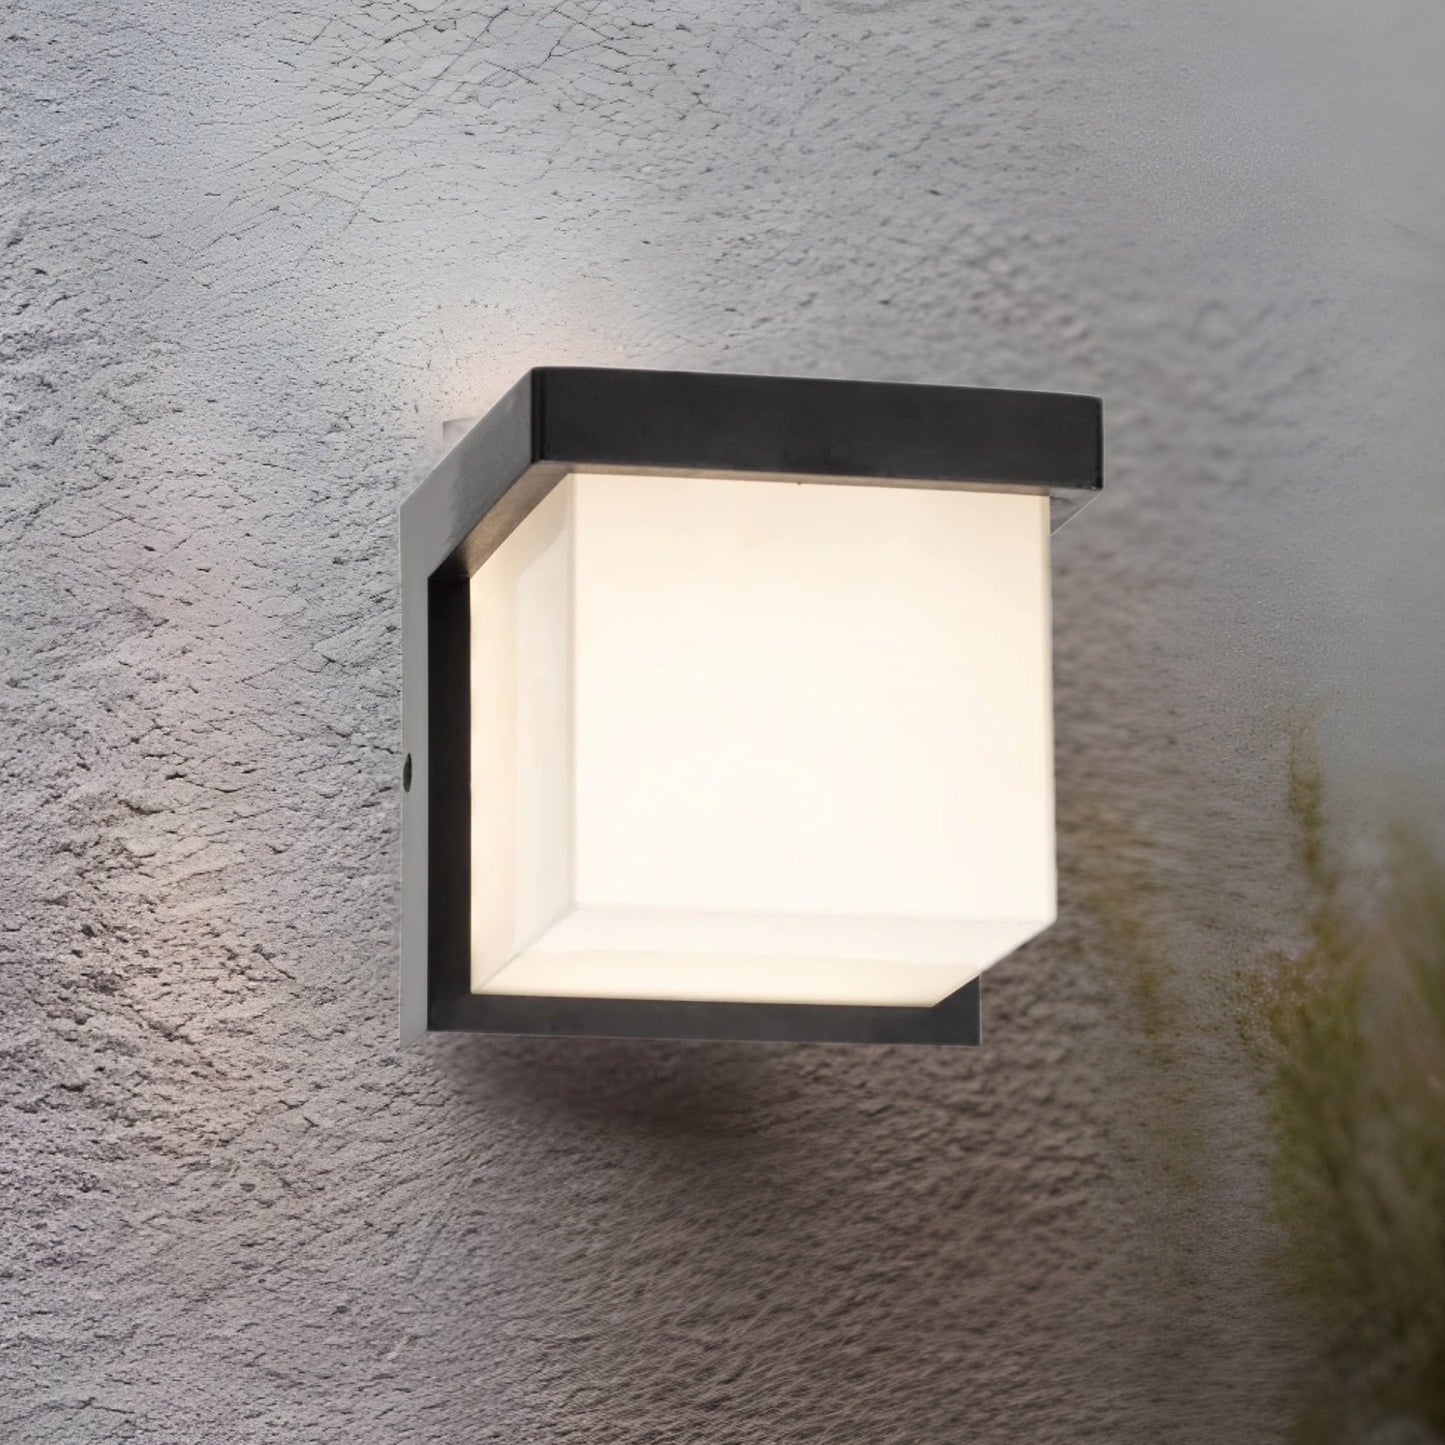 Our Addison black plastic ABS plastic outdoor wall mounted rectangle outdoor light with built in LED's would look perfect in a modern or more traditional home design. Outside wall lights can provide atmospheric light in your garden, at the front door or on the terrace as well as a great security solution. It is designed for durability and longevity with its robust material producing a fully weatherproof and water resistant light fitting.